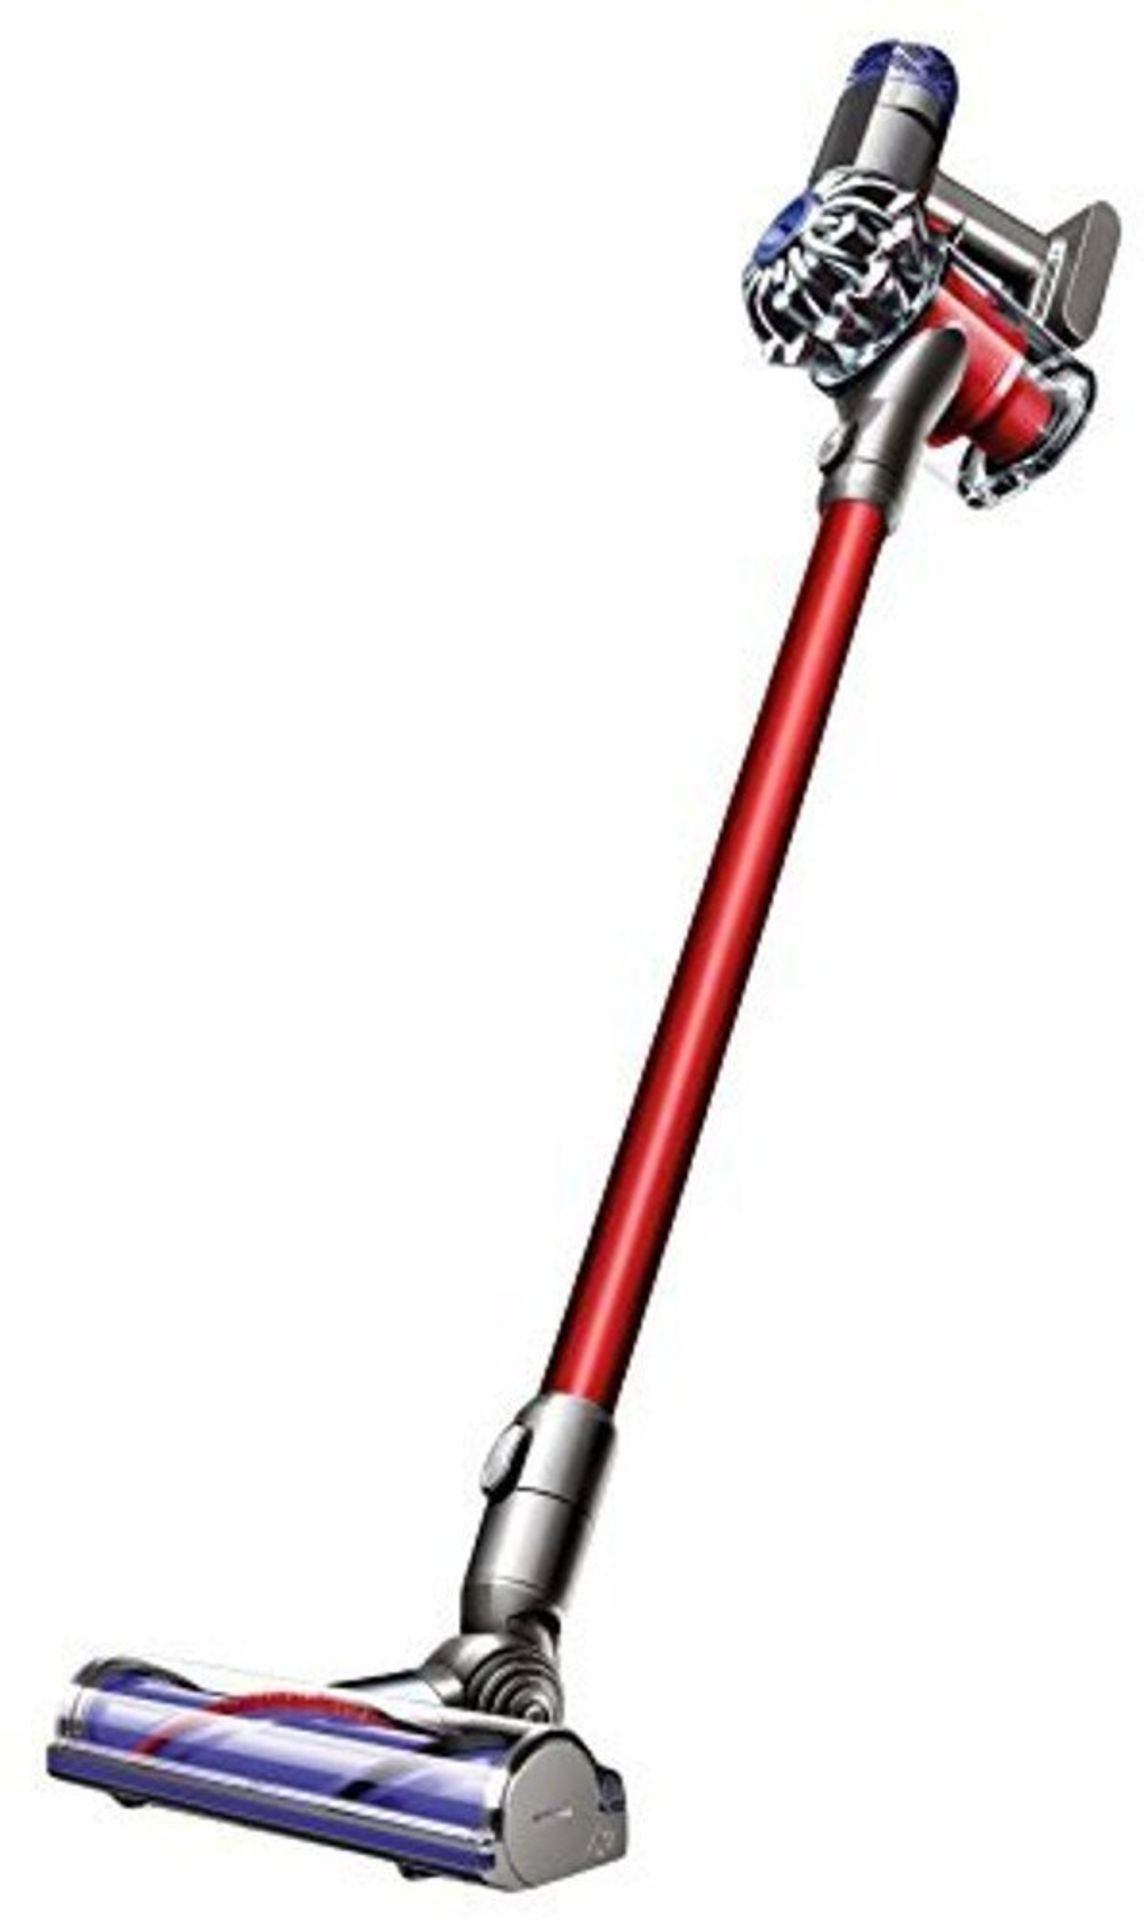 Dyson V6 Total Clean Cordless Handheld Vacuum Cleaner RRP £429.99